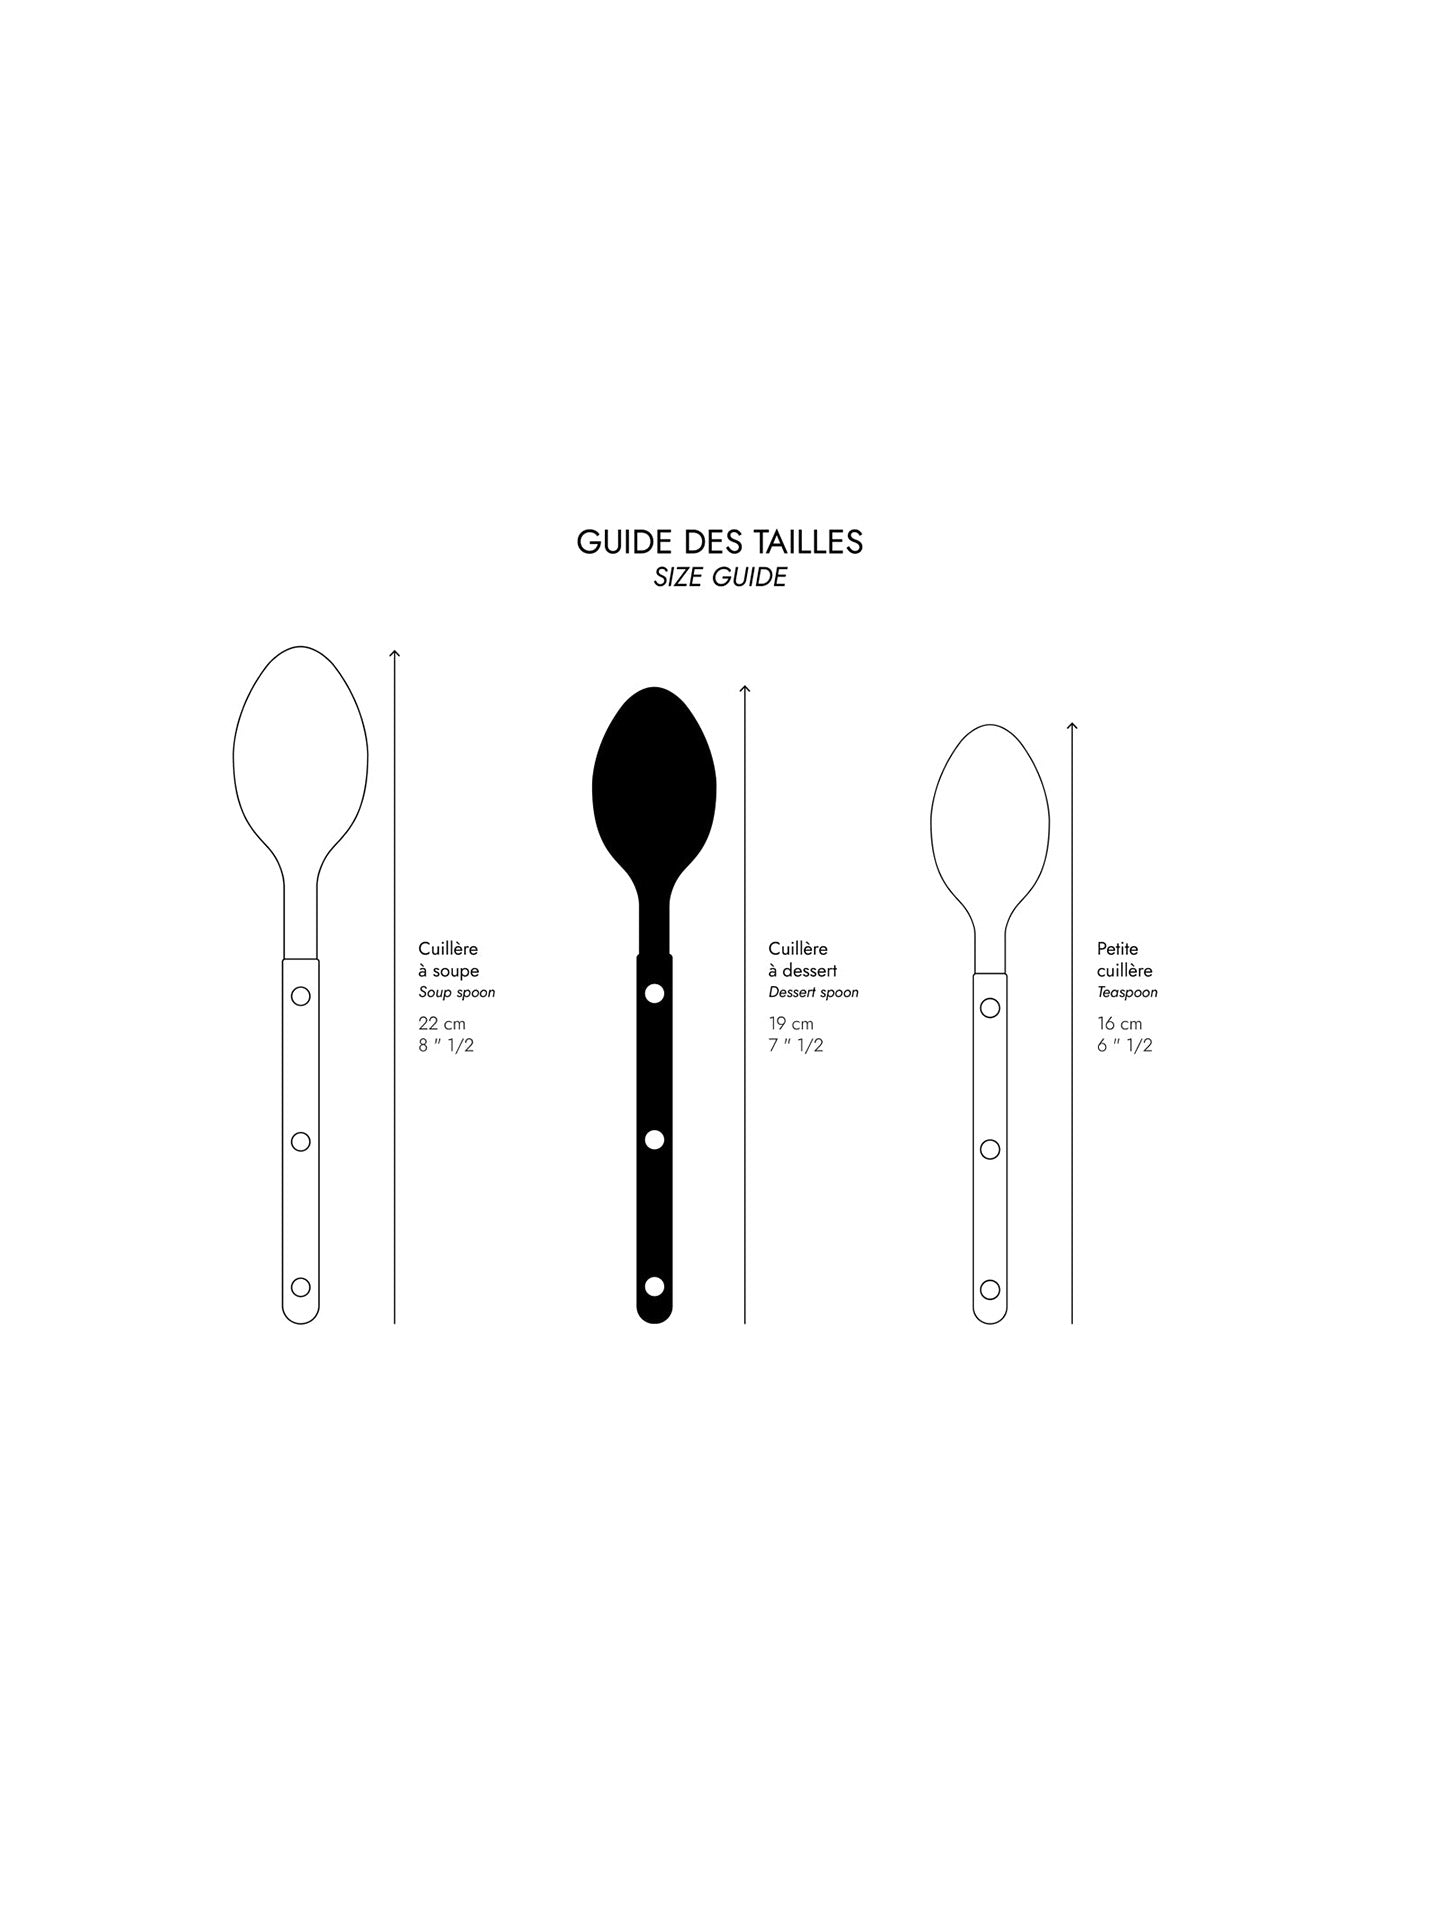 From the size guide for the Bistrot's dessert spoon you can see how it fits between the soup spoon and tea spoon.